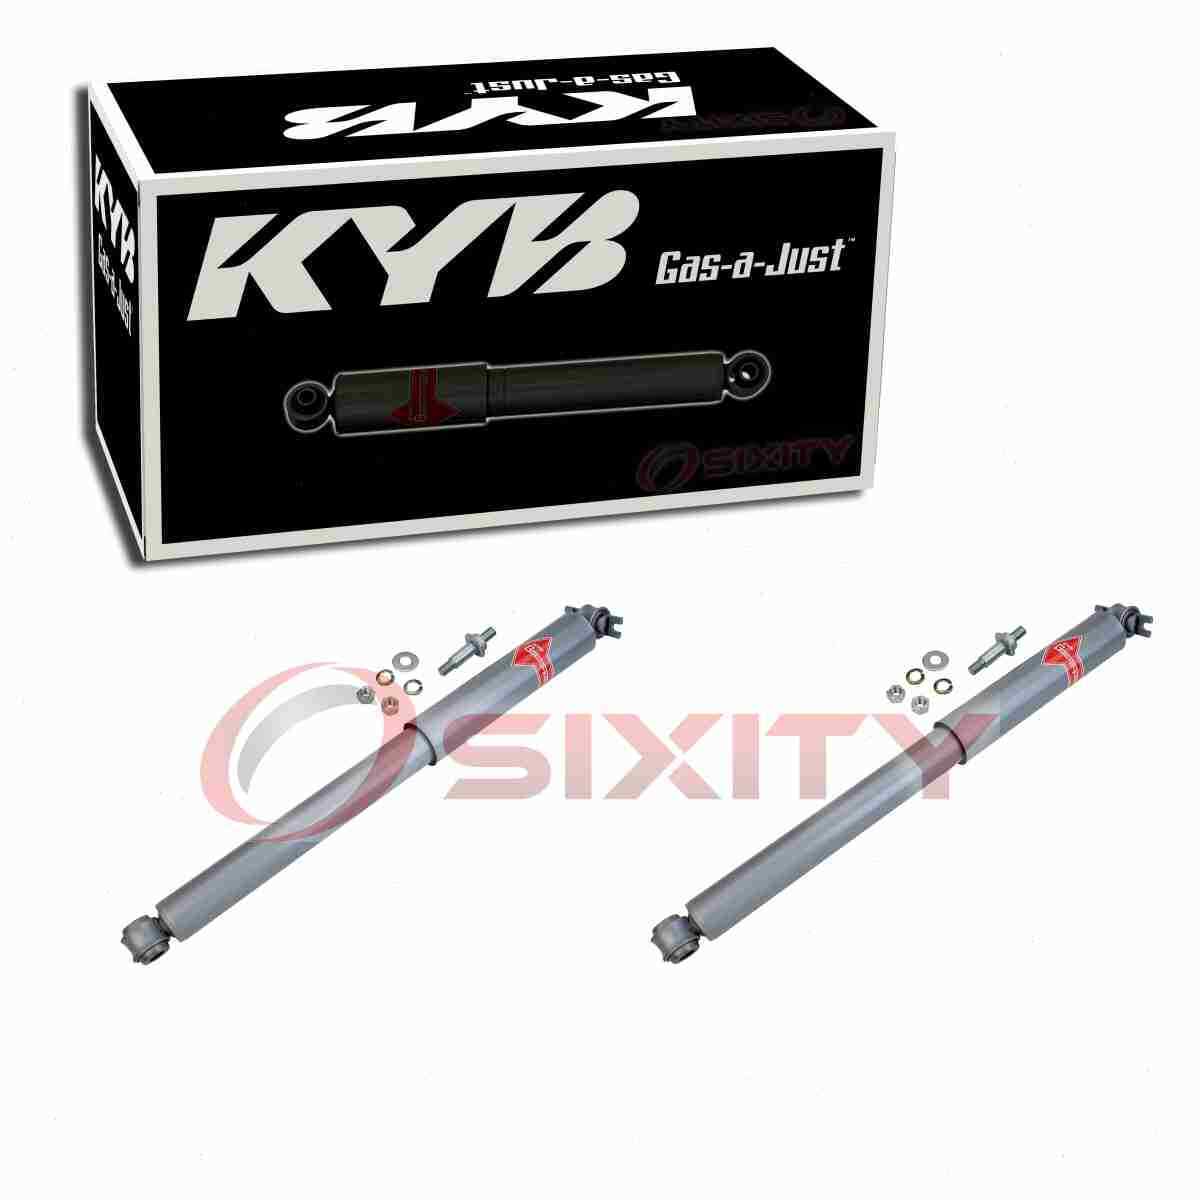 2 pc KYB Gas-a-Just Rear Shock Absorbers for 1978-1984 Oldsmobile Cutlass wp